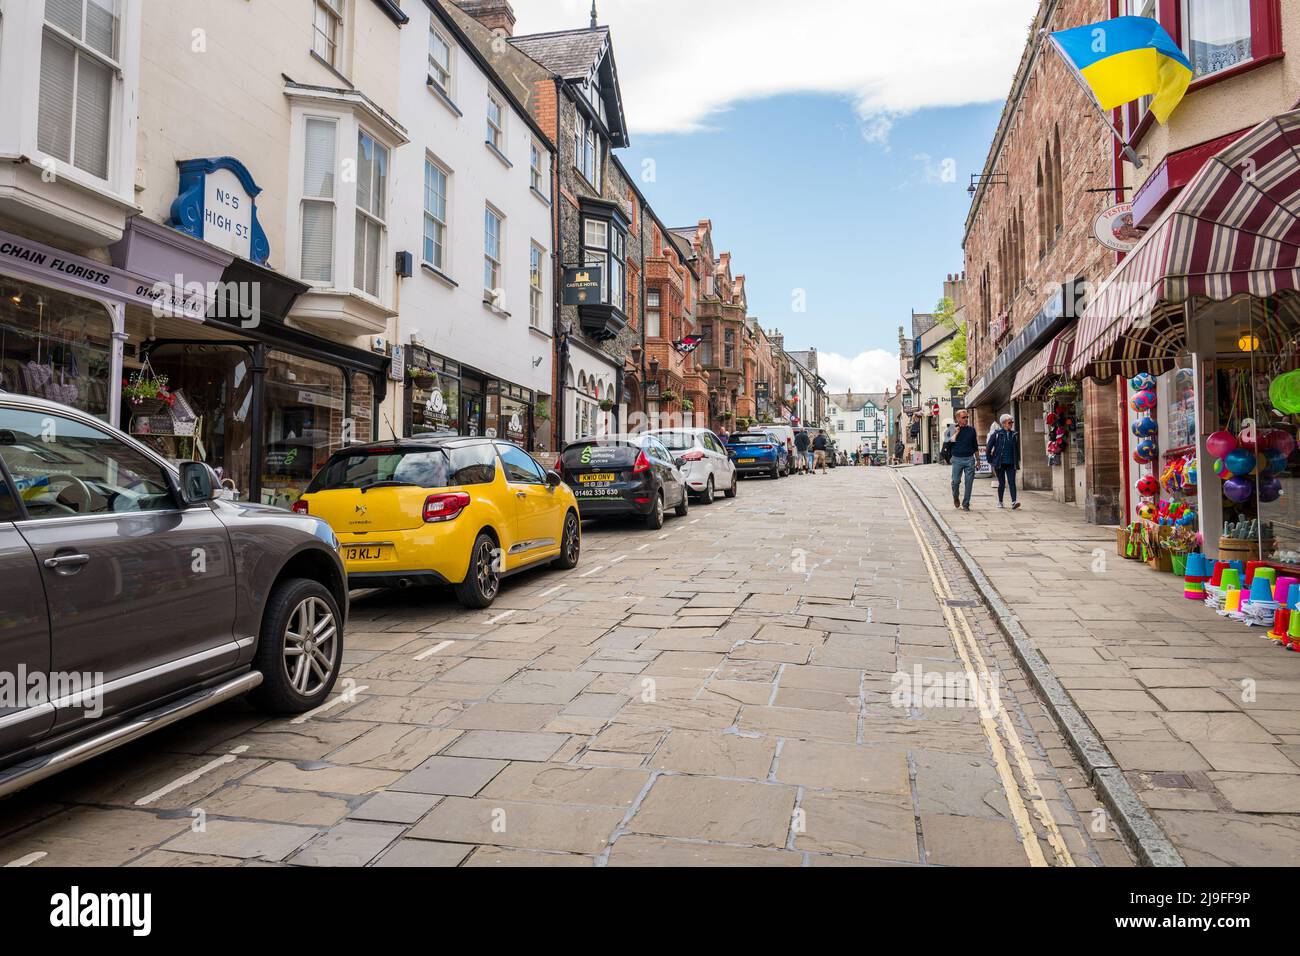 High St. a popular shopping area in the Welsh town of Conwy. Stock Photo